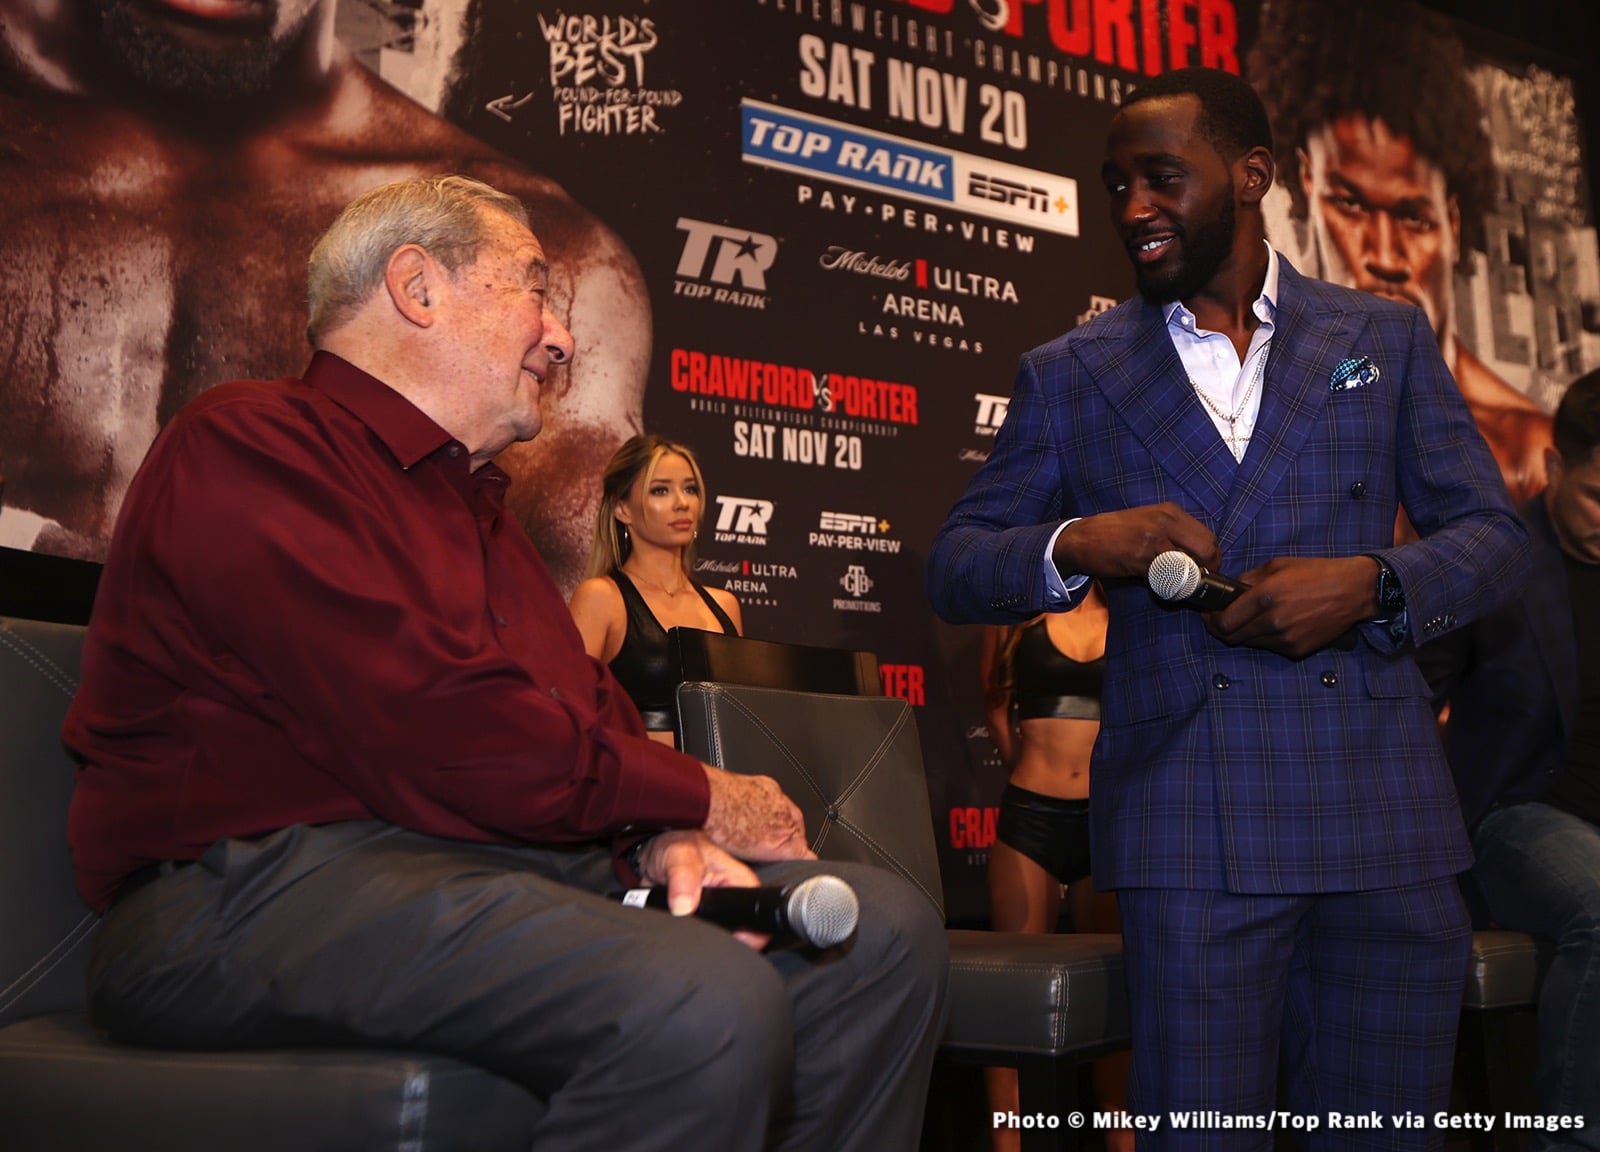 Terence Crawford says he'll prove he's #1 pound-for-pound by beating Porter on Nov.20th